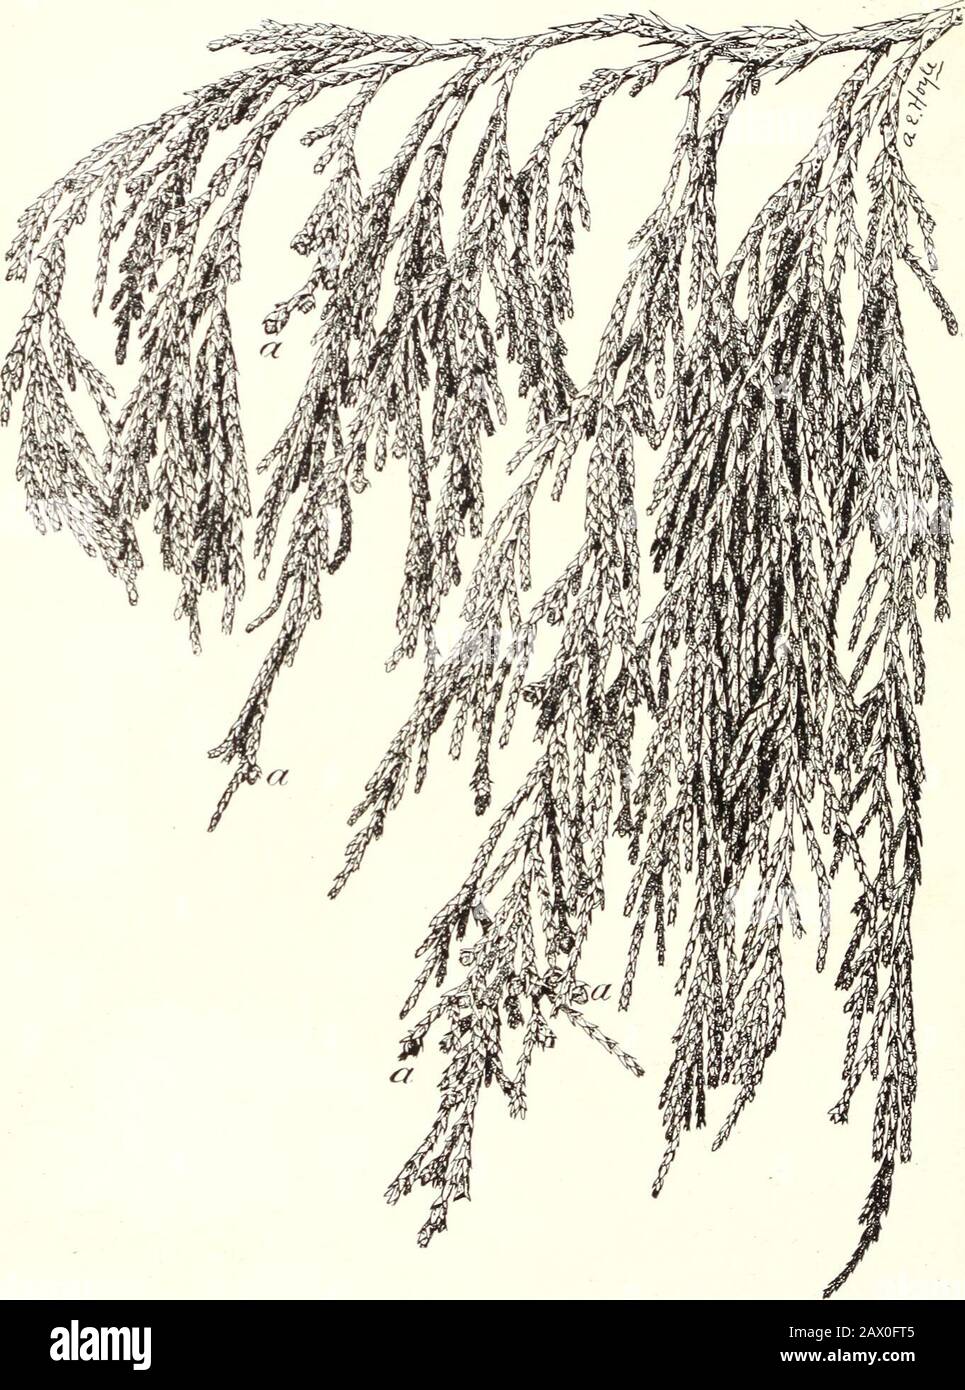 The cypress and juniper trees of the Rocky Mountain region . juniperus flaccida: showing drooping habit of branchlets of trees in Exposed Sites. a, Detached leaf showing resin gland on back (enlarged five times natural size). Bui. 207, U. S. Dept. of Agriculture. Plate XXIV.. JUNIPERUS FLACCIDA: SHOWING PENDENT BRANCHLETS OF TREES IN SHELTERED SlTES.a, Female flowers (in autumn). Bui. 207, U. S. Dept of Agricultur Plate XXV. Stock Photo